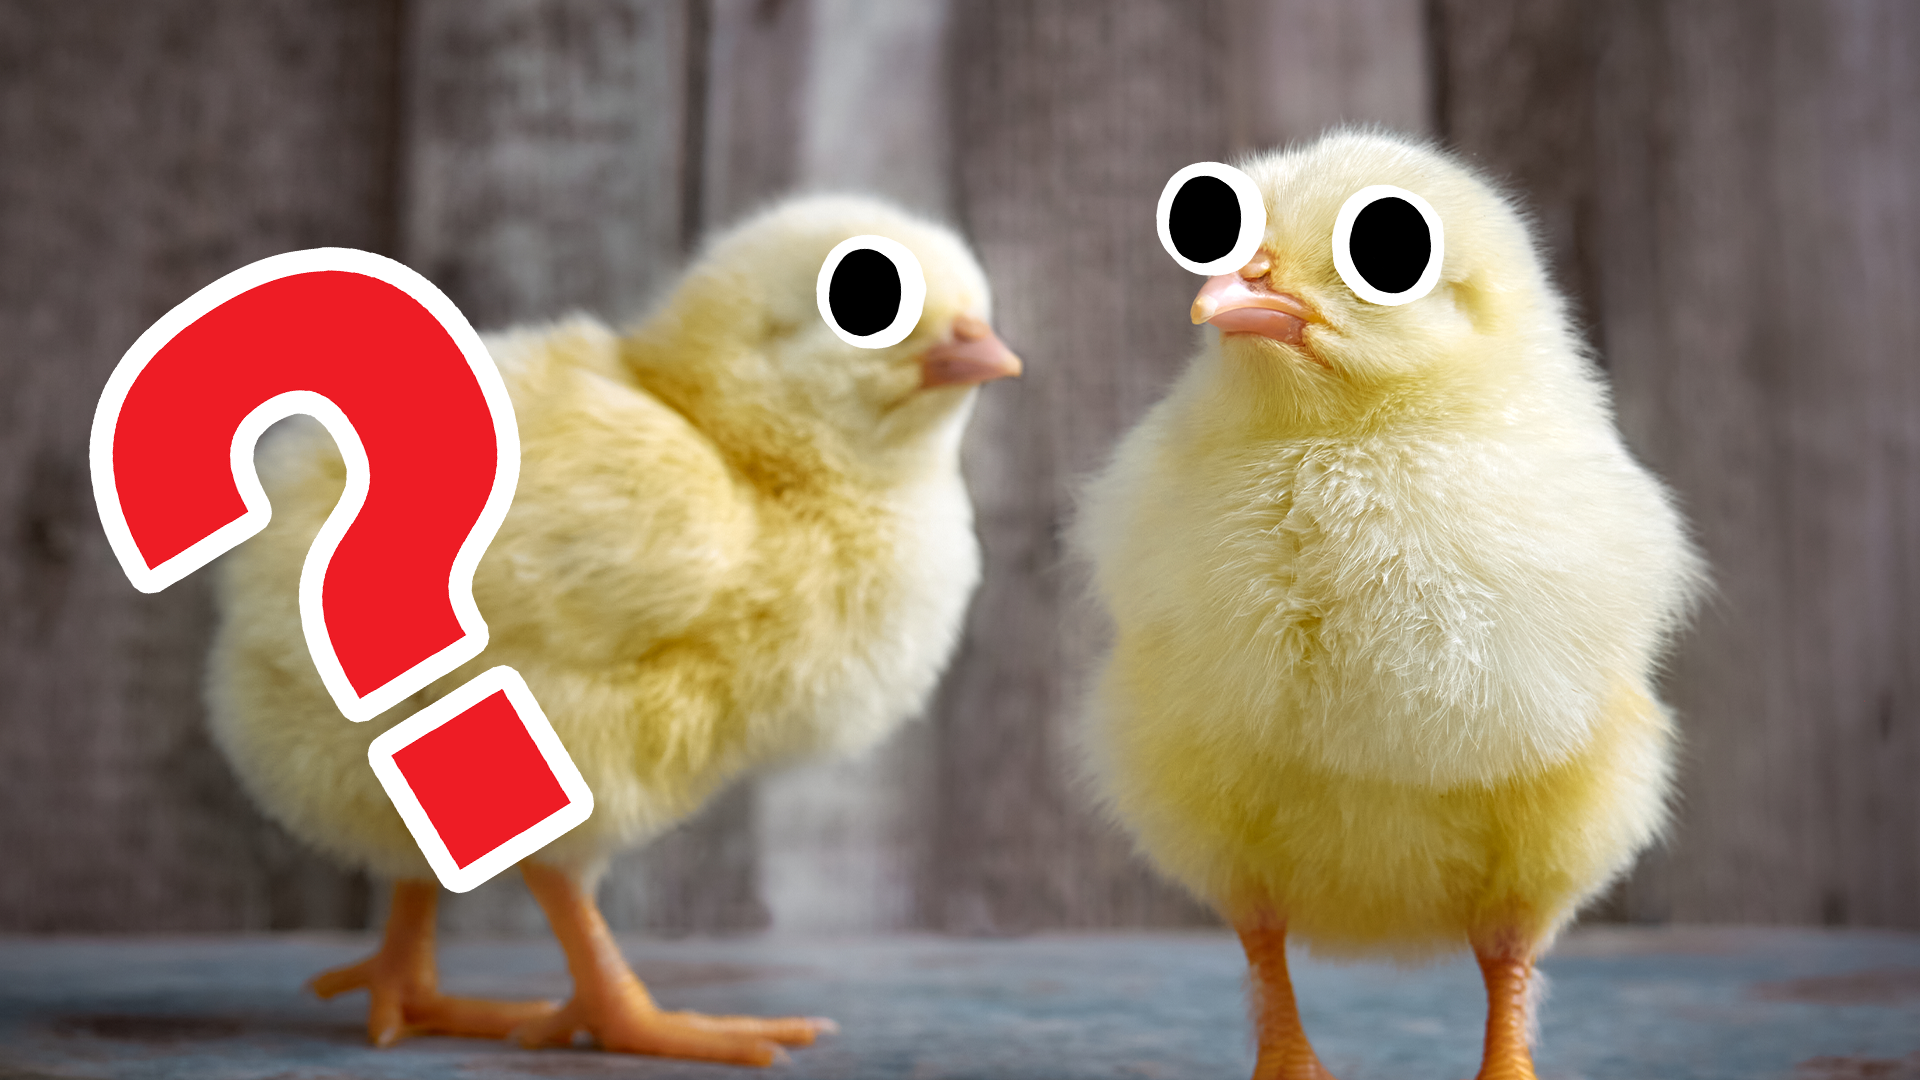 Easter chicks with question mark